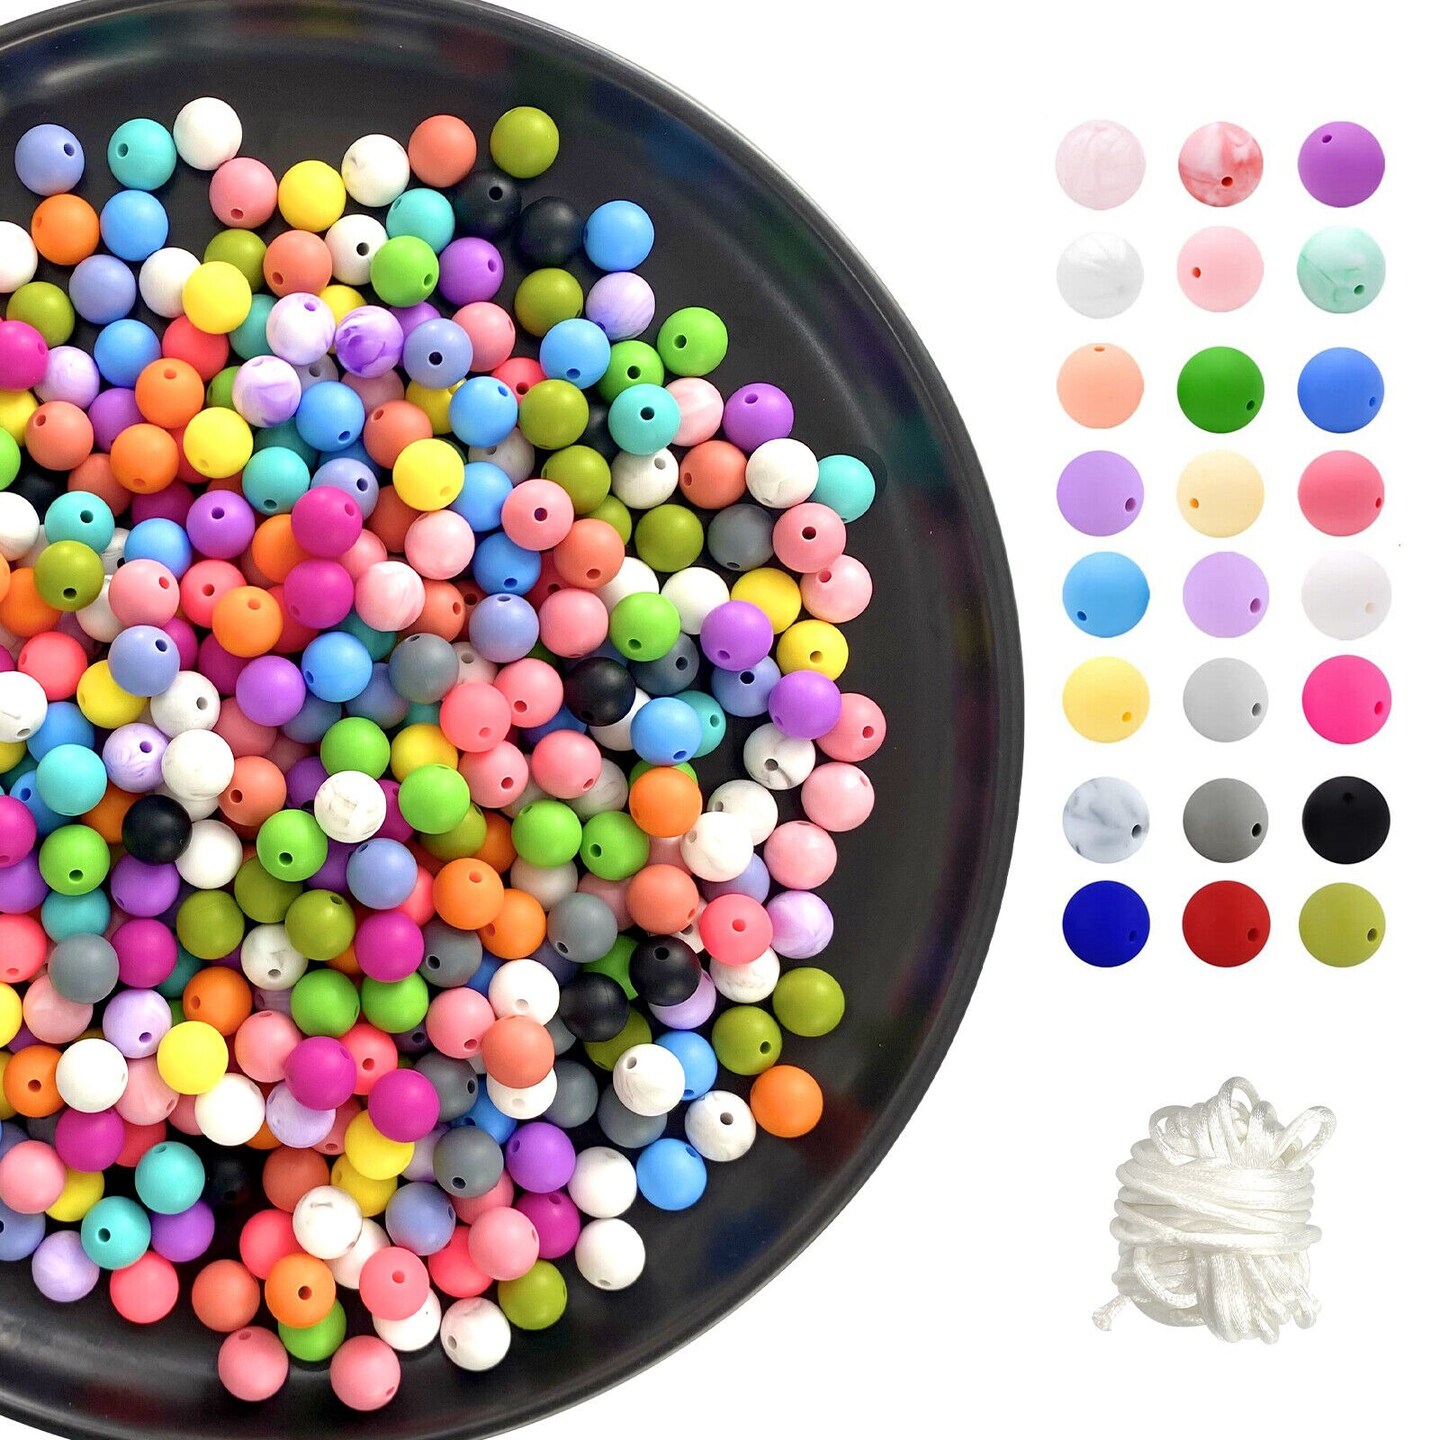 500pcs Round Silicone Loose Beads for DIY Craft Jewelry Making